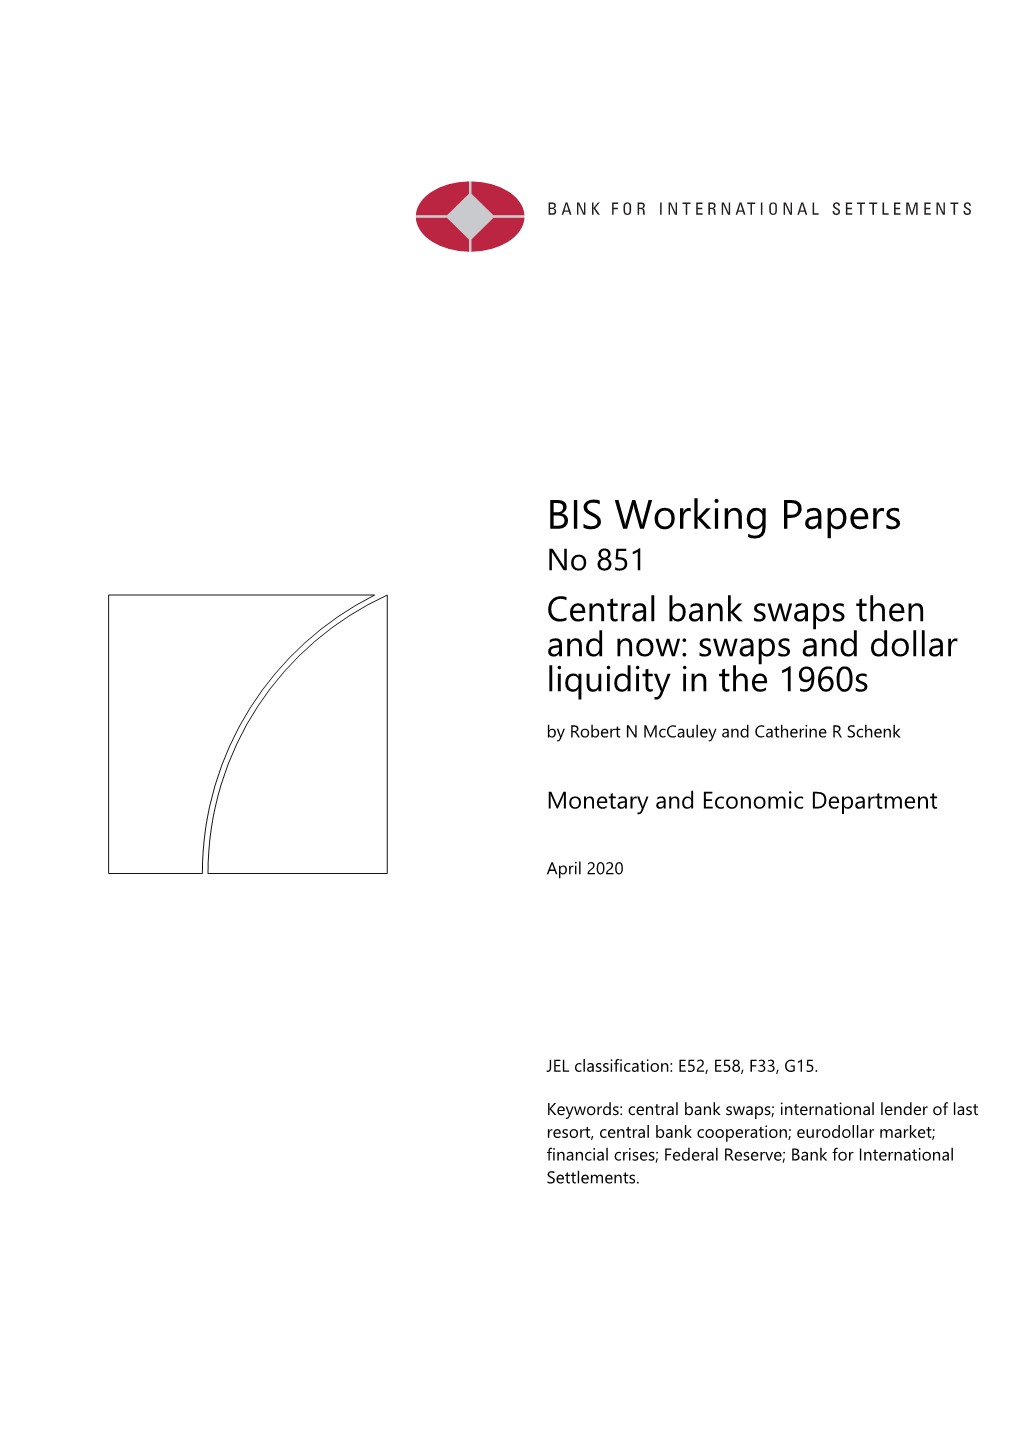 BIS Working Papers No 851 Central Bank Swaps Then and Now: Swaps and Dollar Liquidity in the 1960S